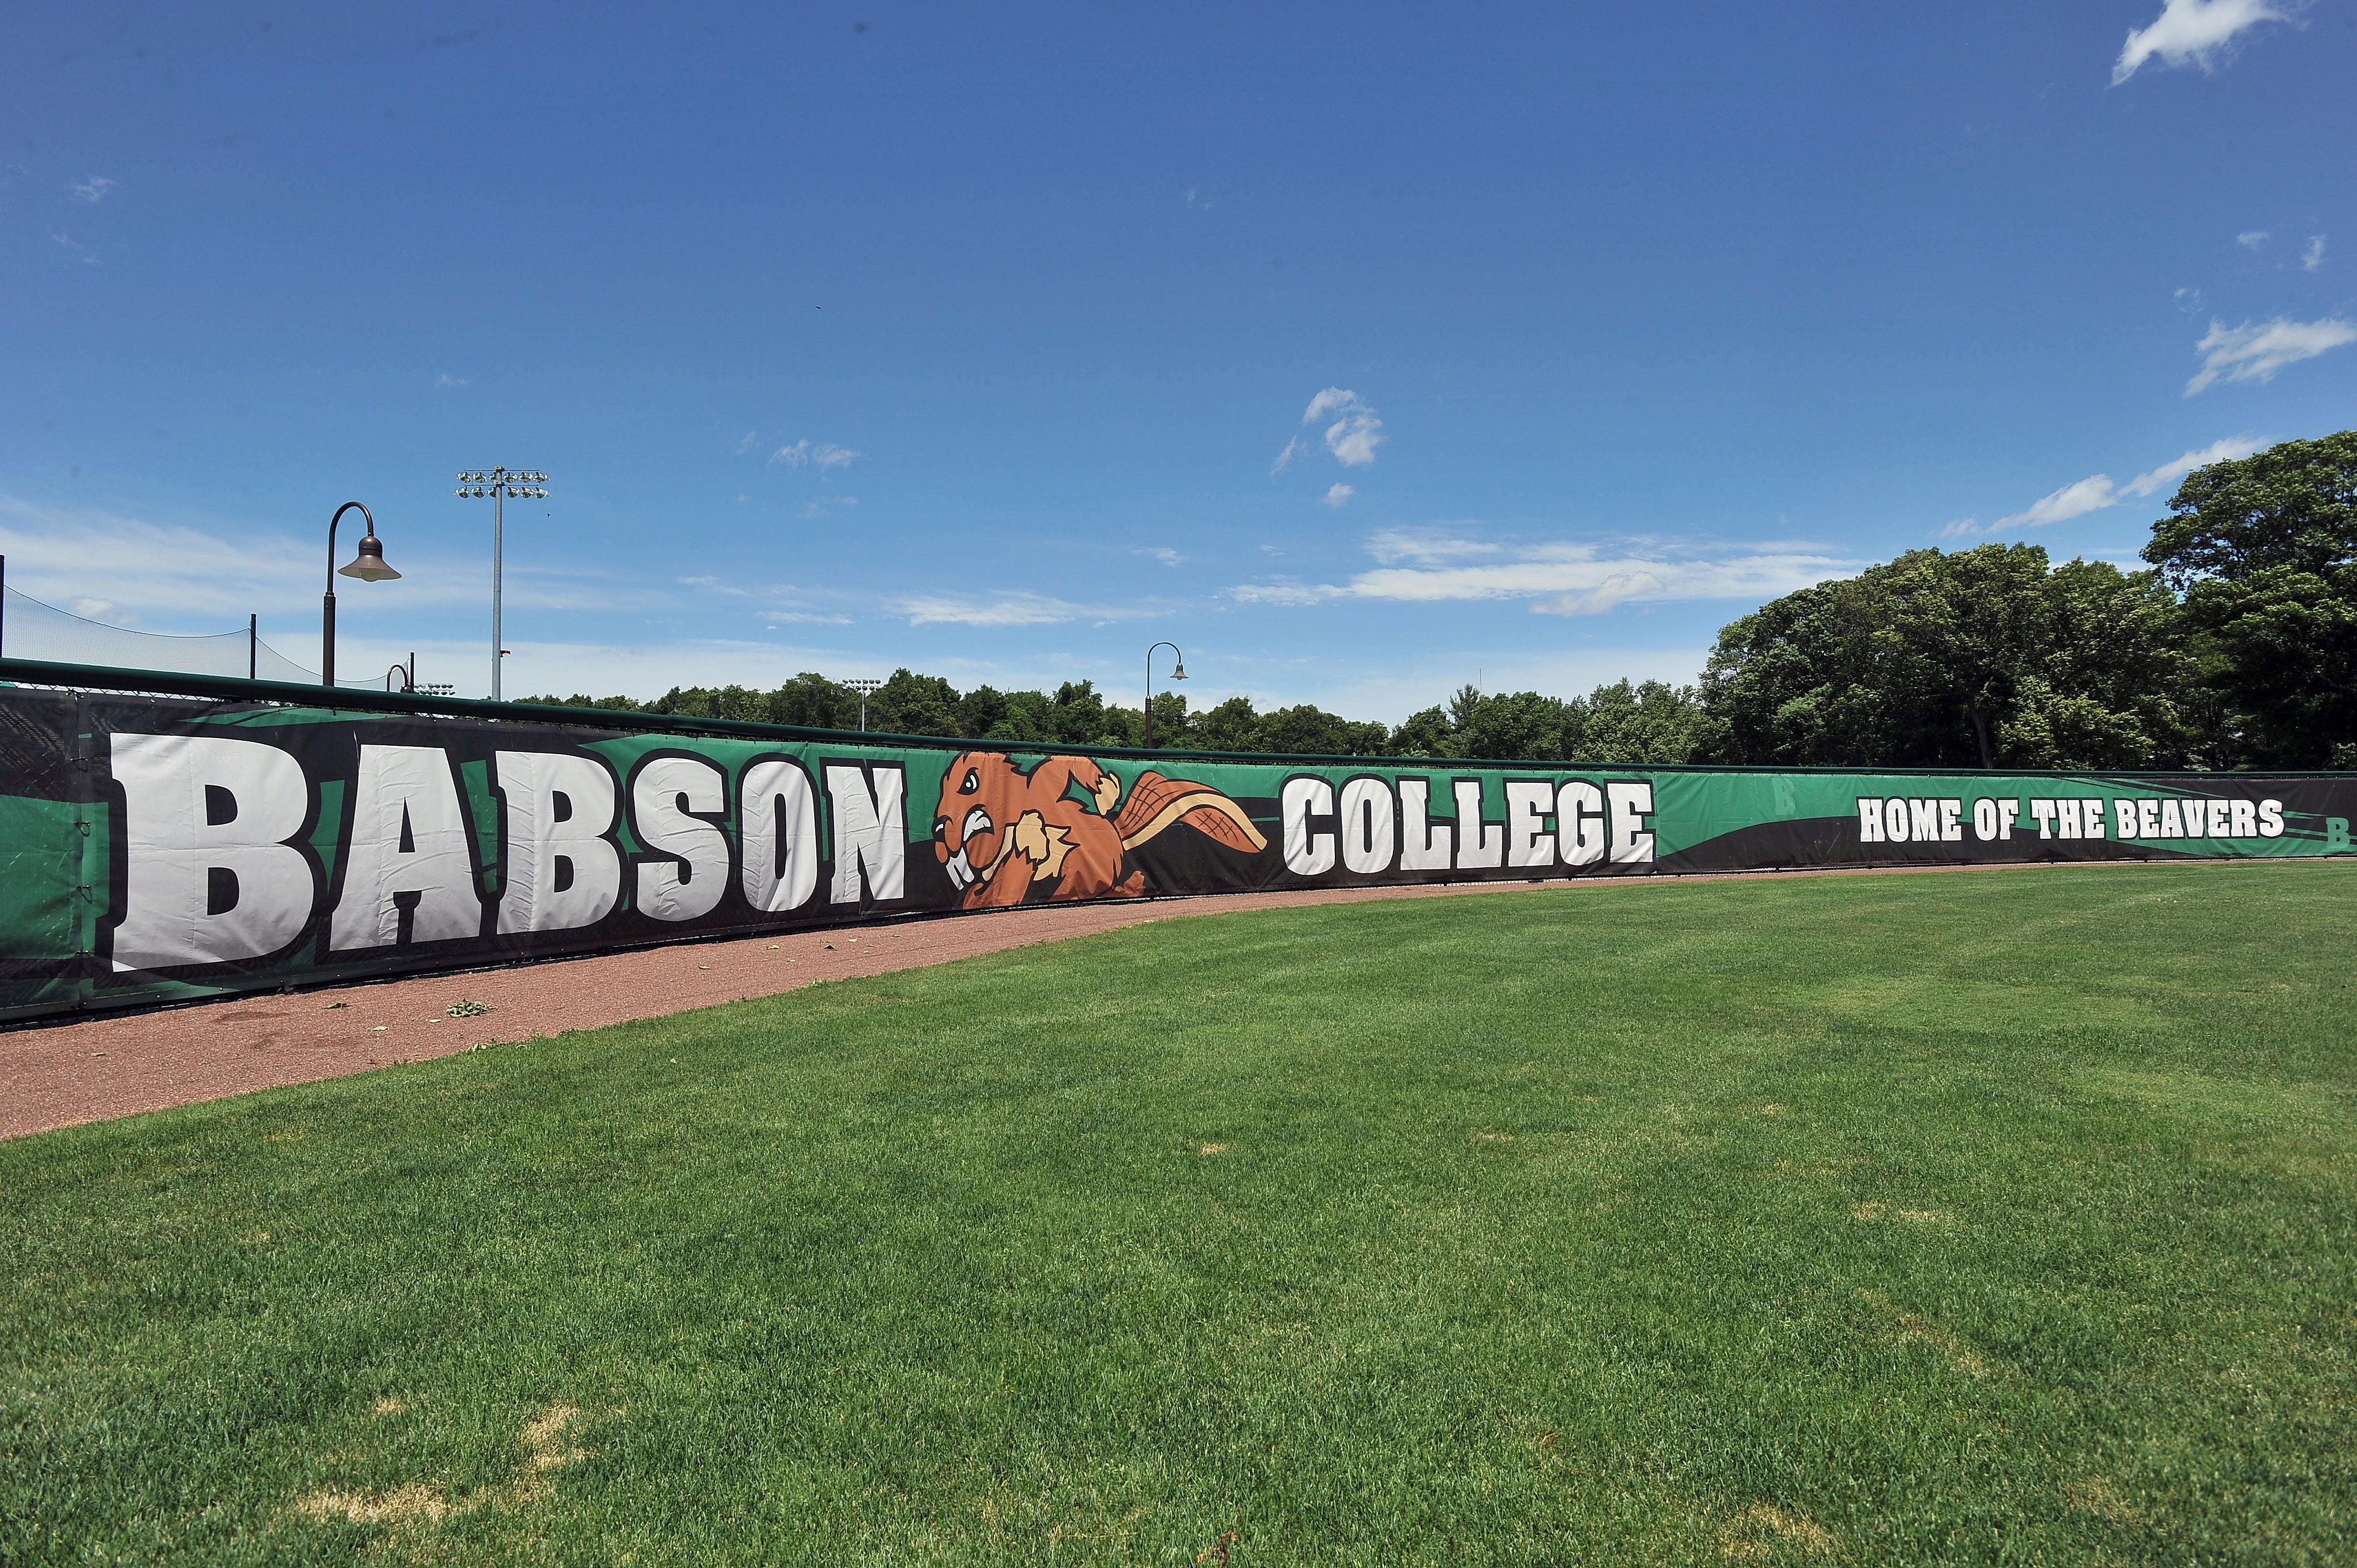 With a little creativity, the task can be much less daunting.Babson College